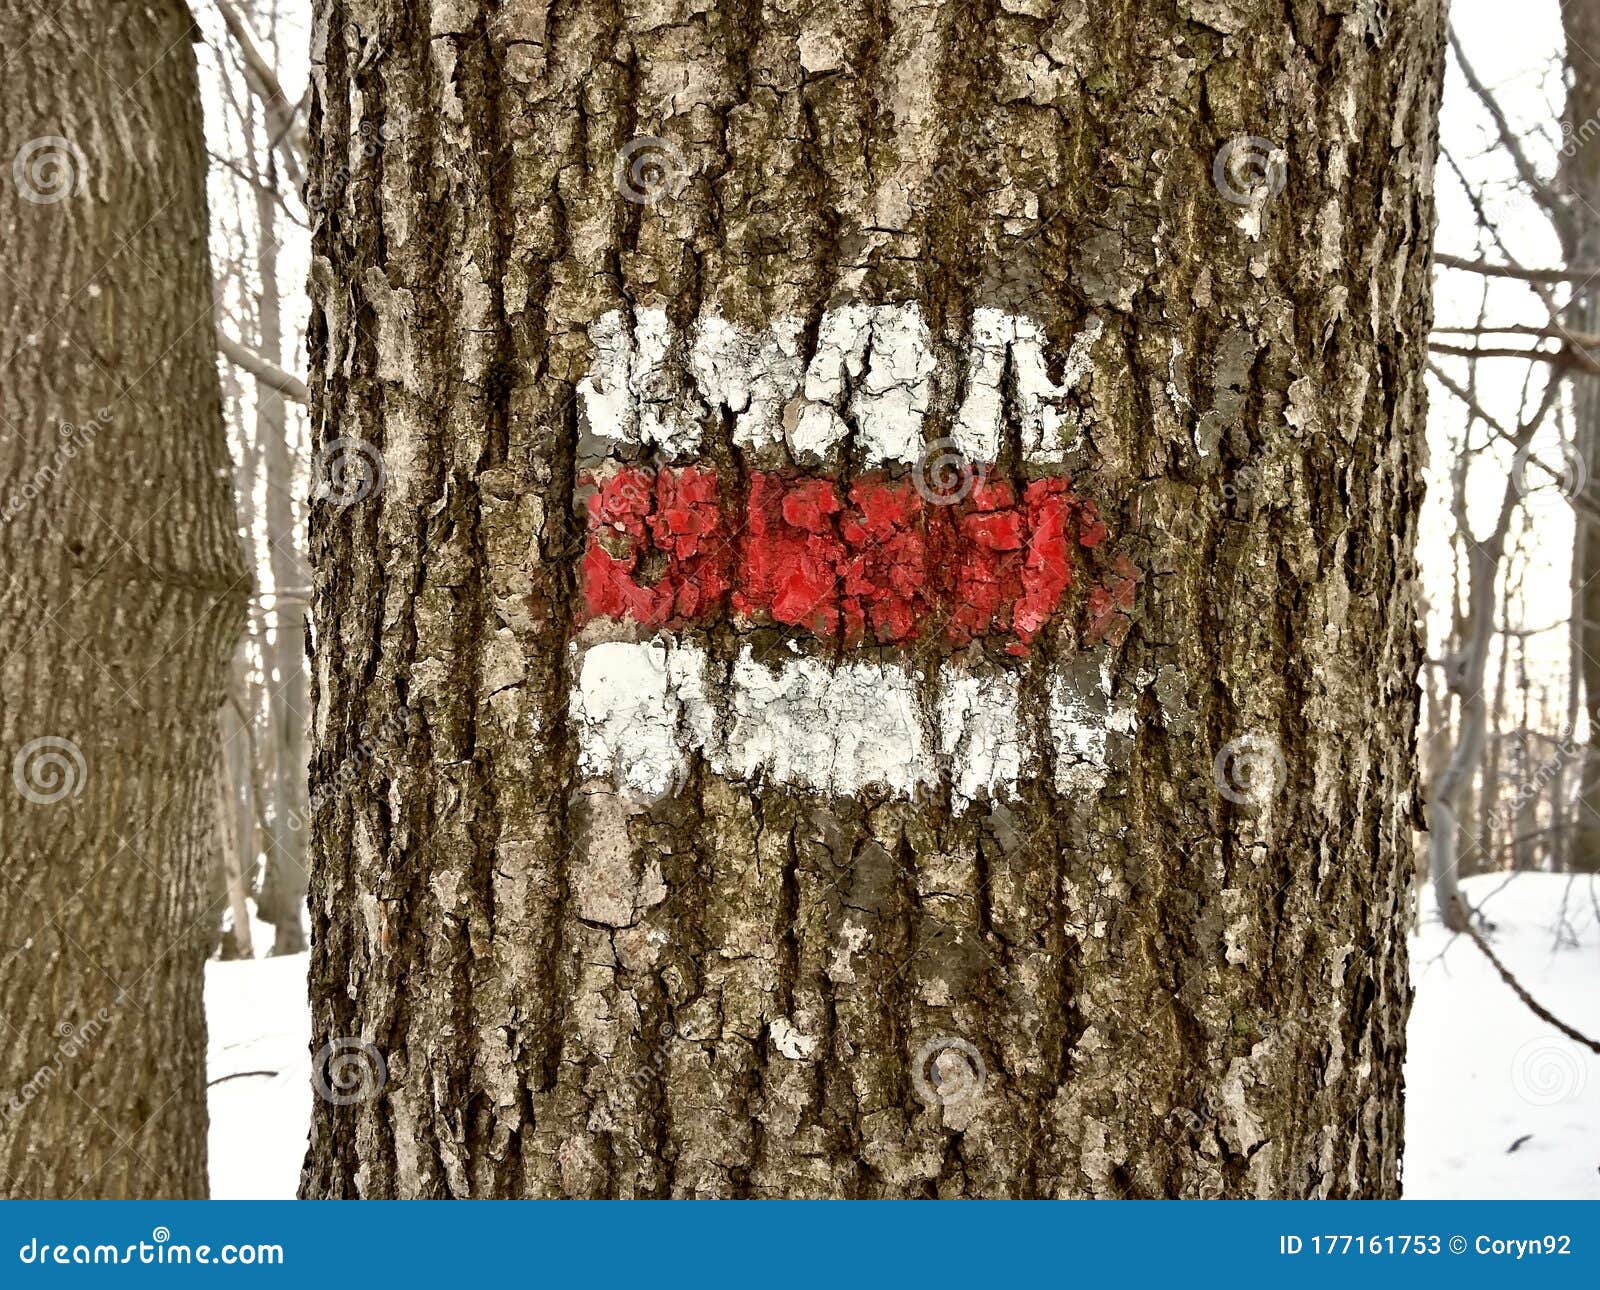 red touristic mark on tree trunk rugger bark in snowy winter deciduous wood